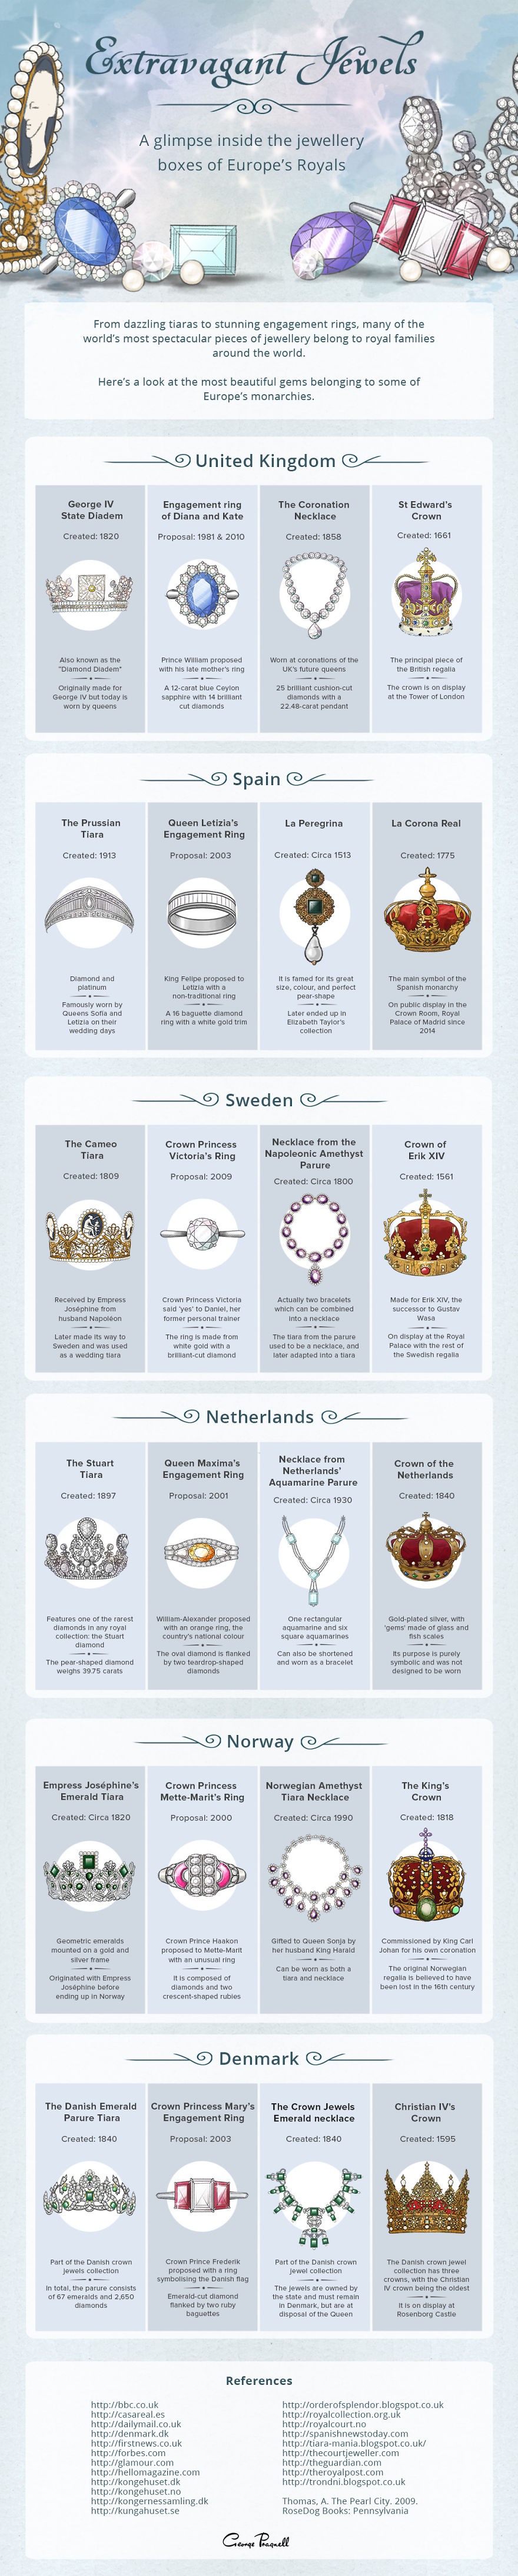 A Comparison Of Europe's Royal Jewellery